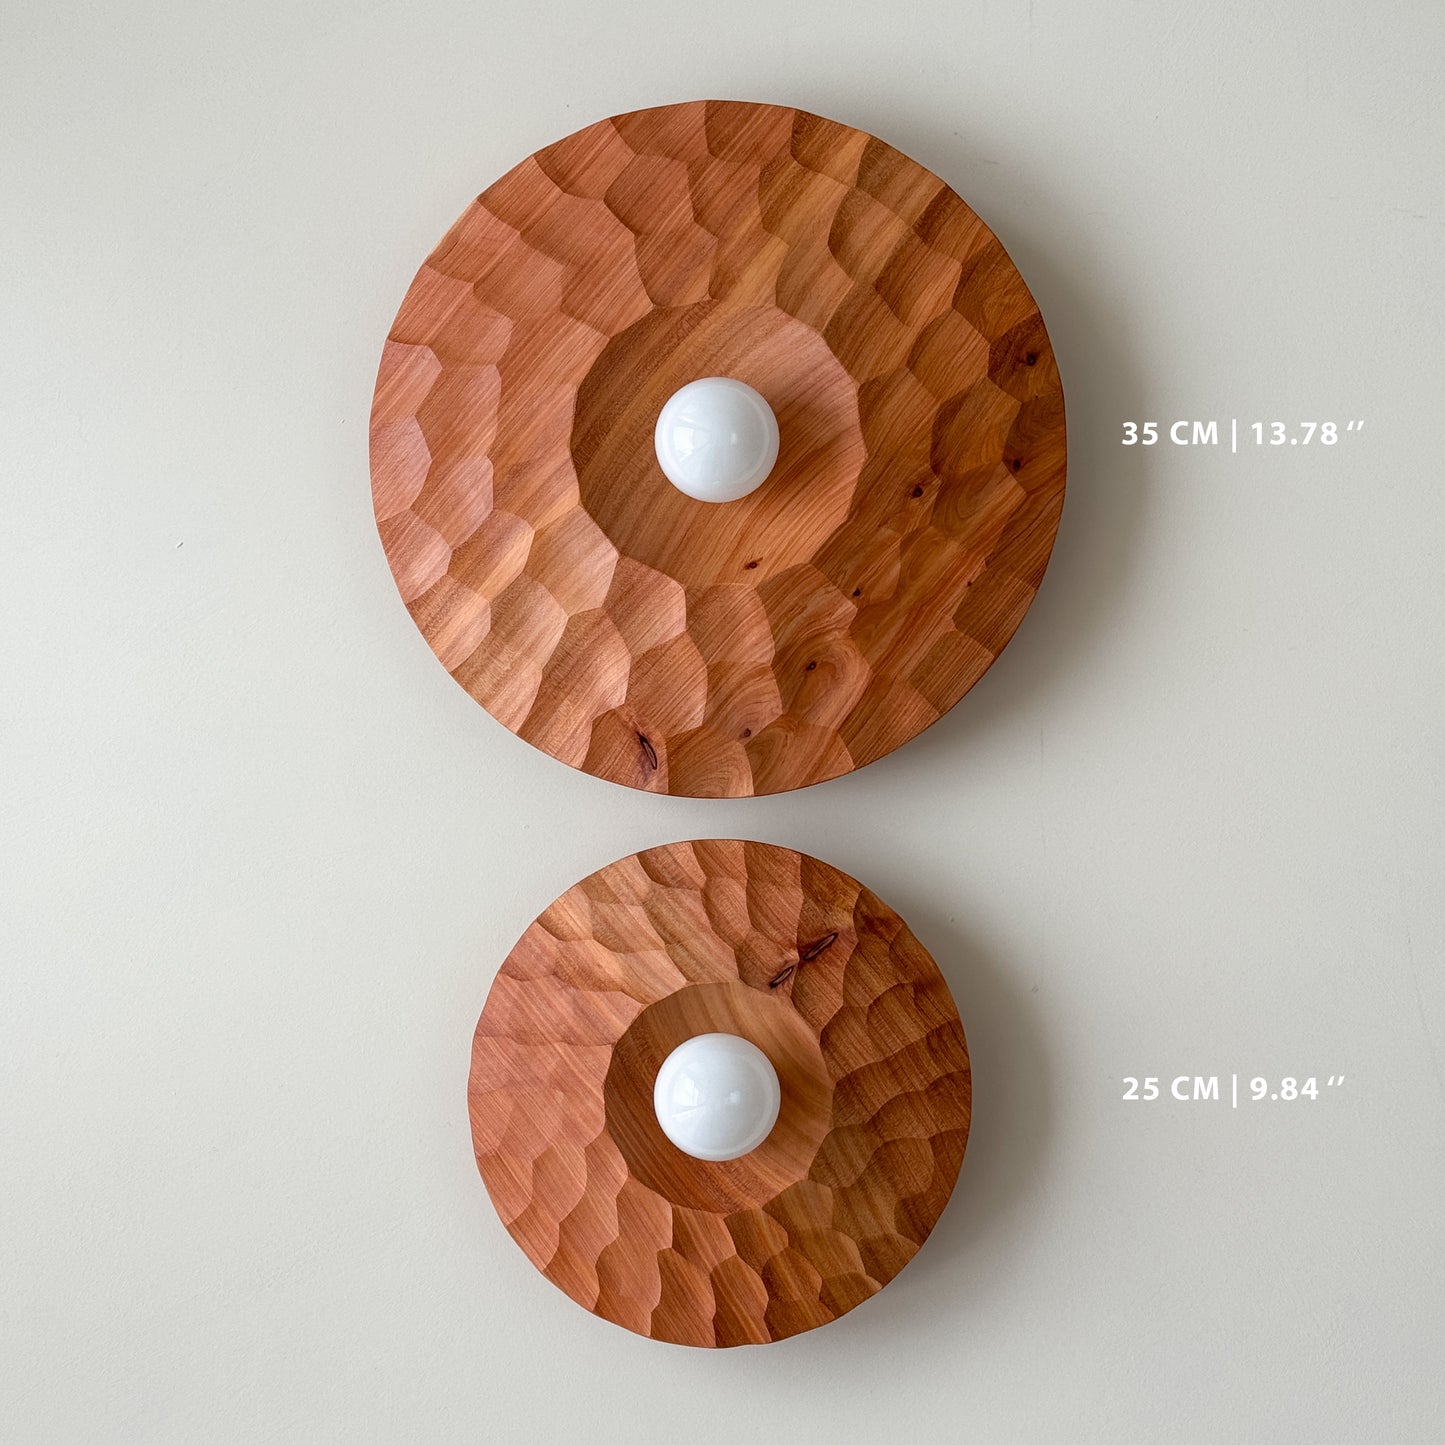 "There is no light without shadow" | Cedar Wall Lamp